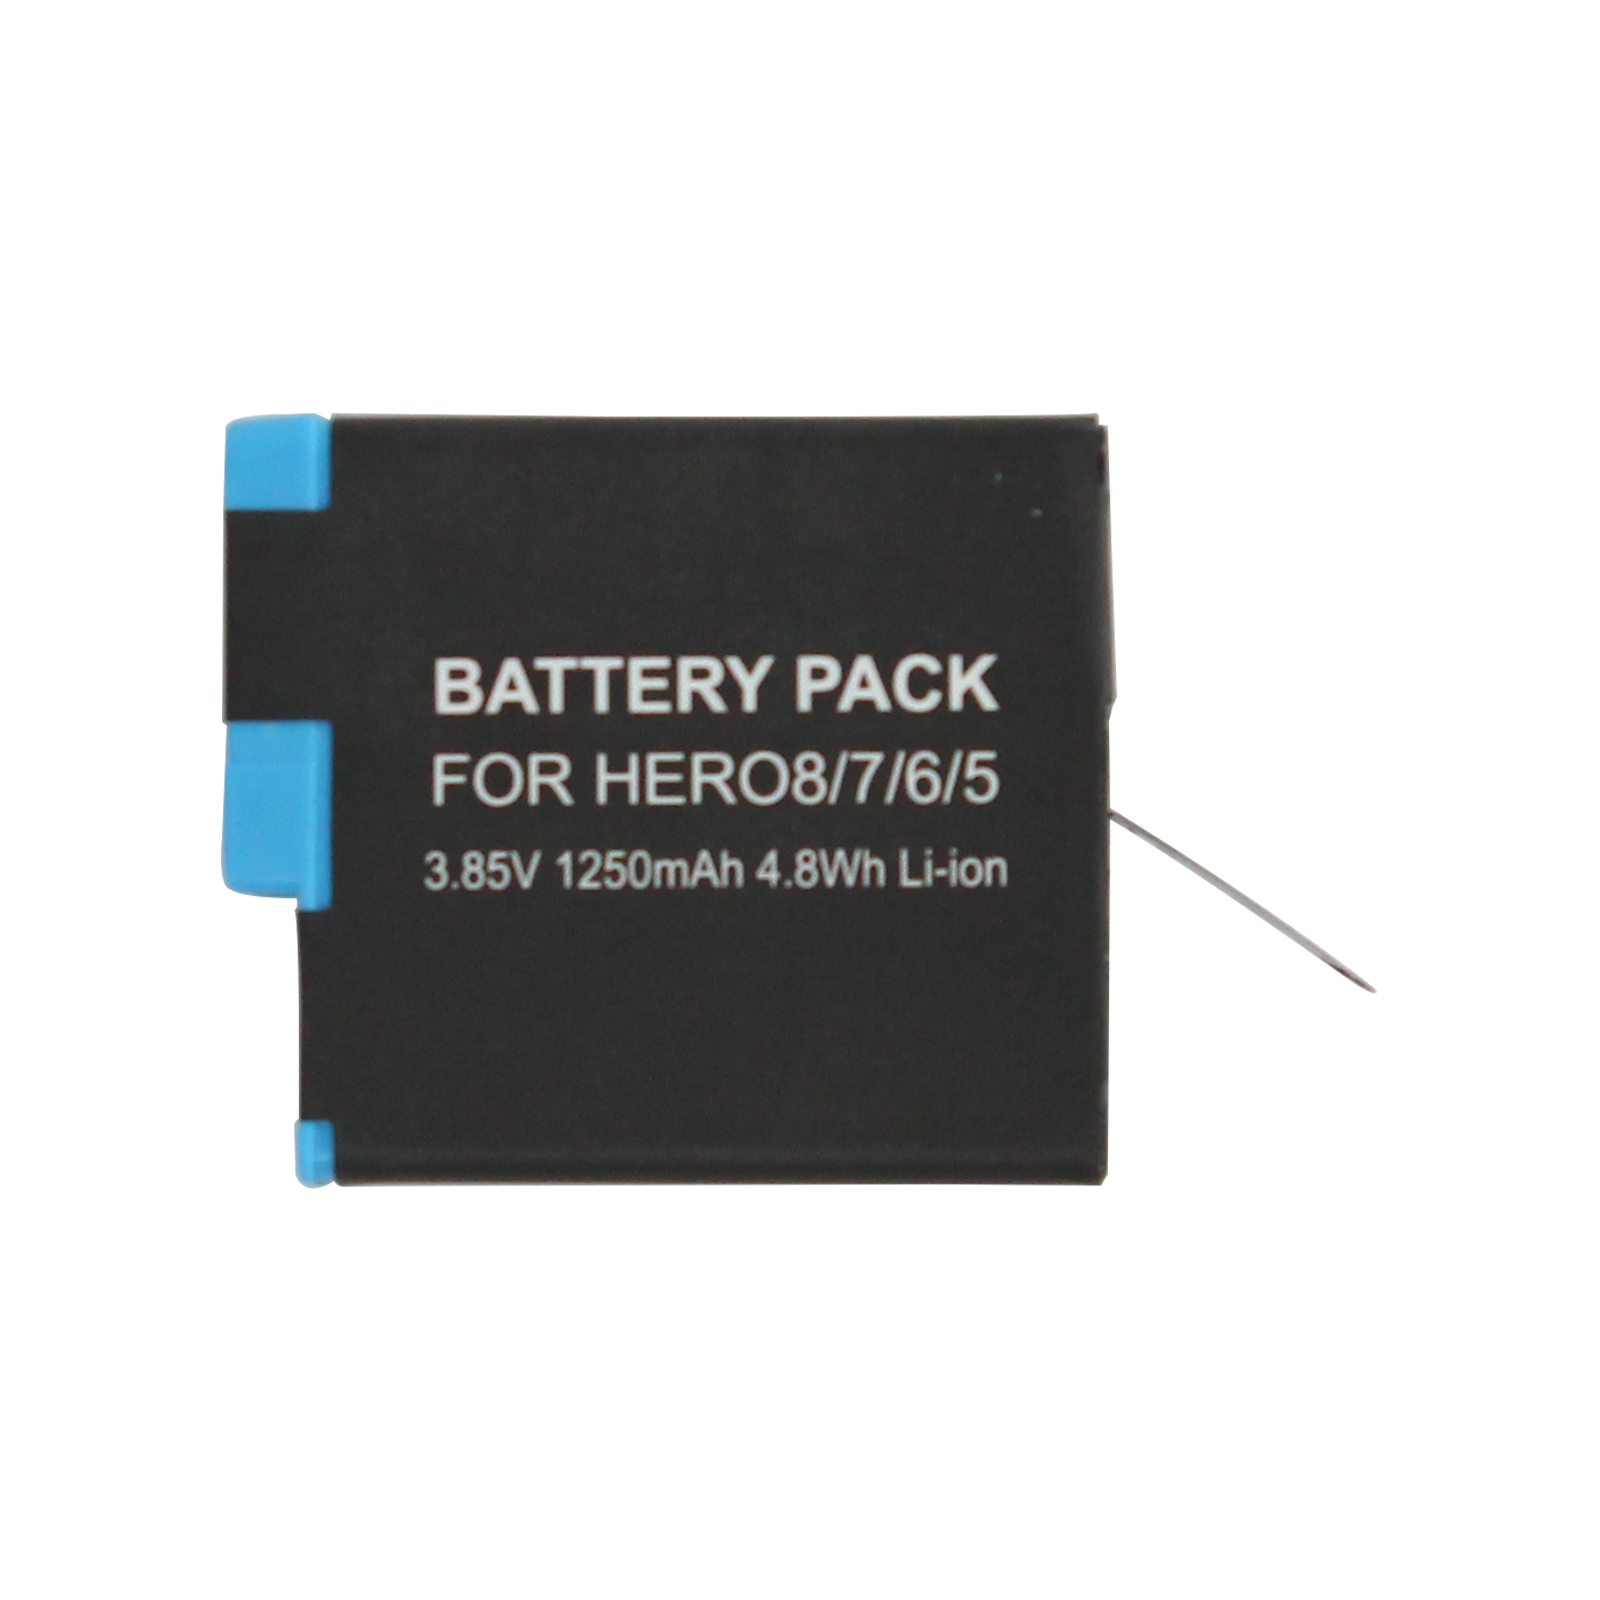 AHDBT-801 Battery Replacement for GoPro AHDBT-801 Camera - Compatible with SPJB1B Fully Decoded Battery - image 3 of 3